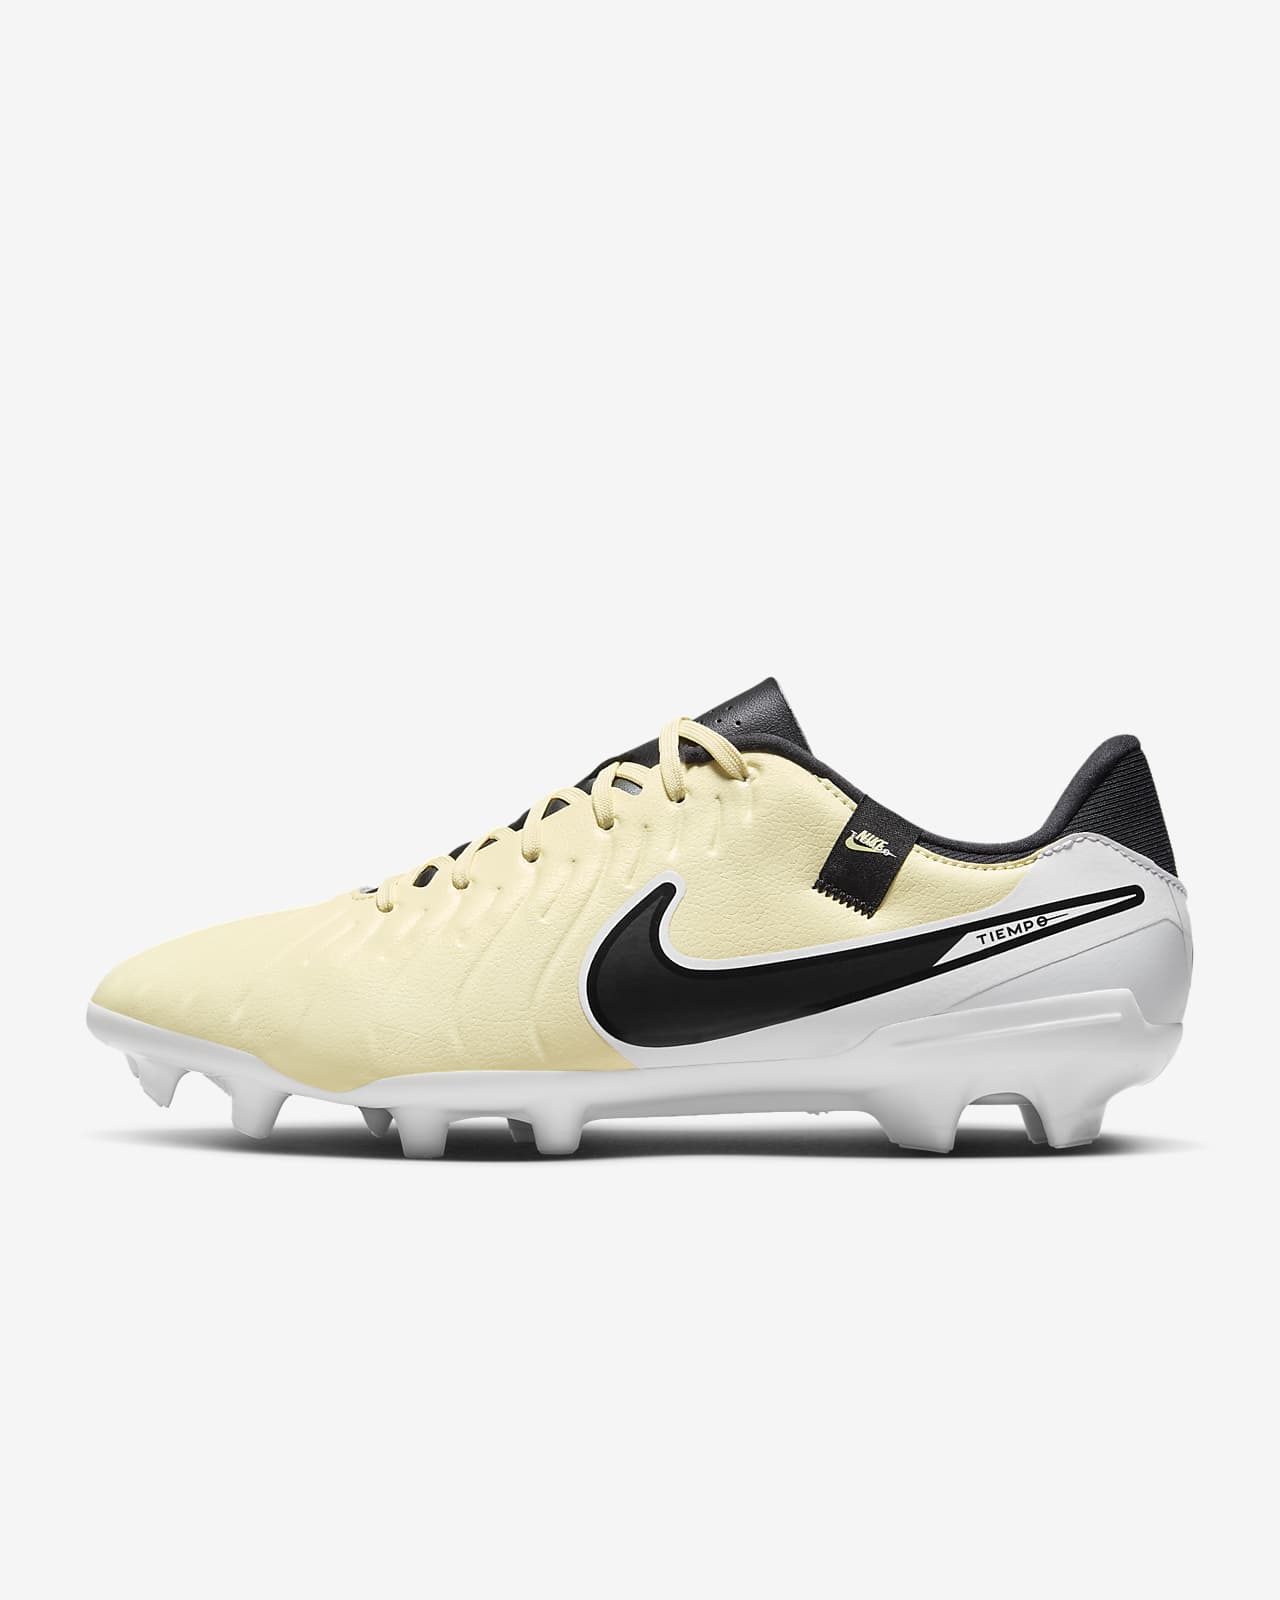 Nike Tiempo Legend 10 Academy Multi-Ground Cleats. Low-Top Soccer